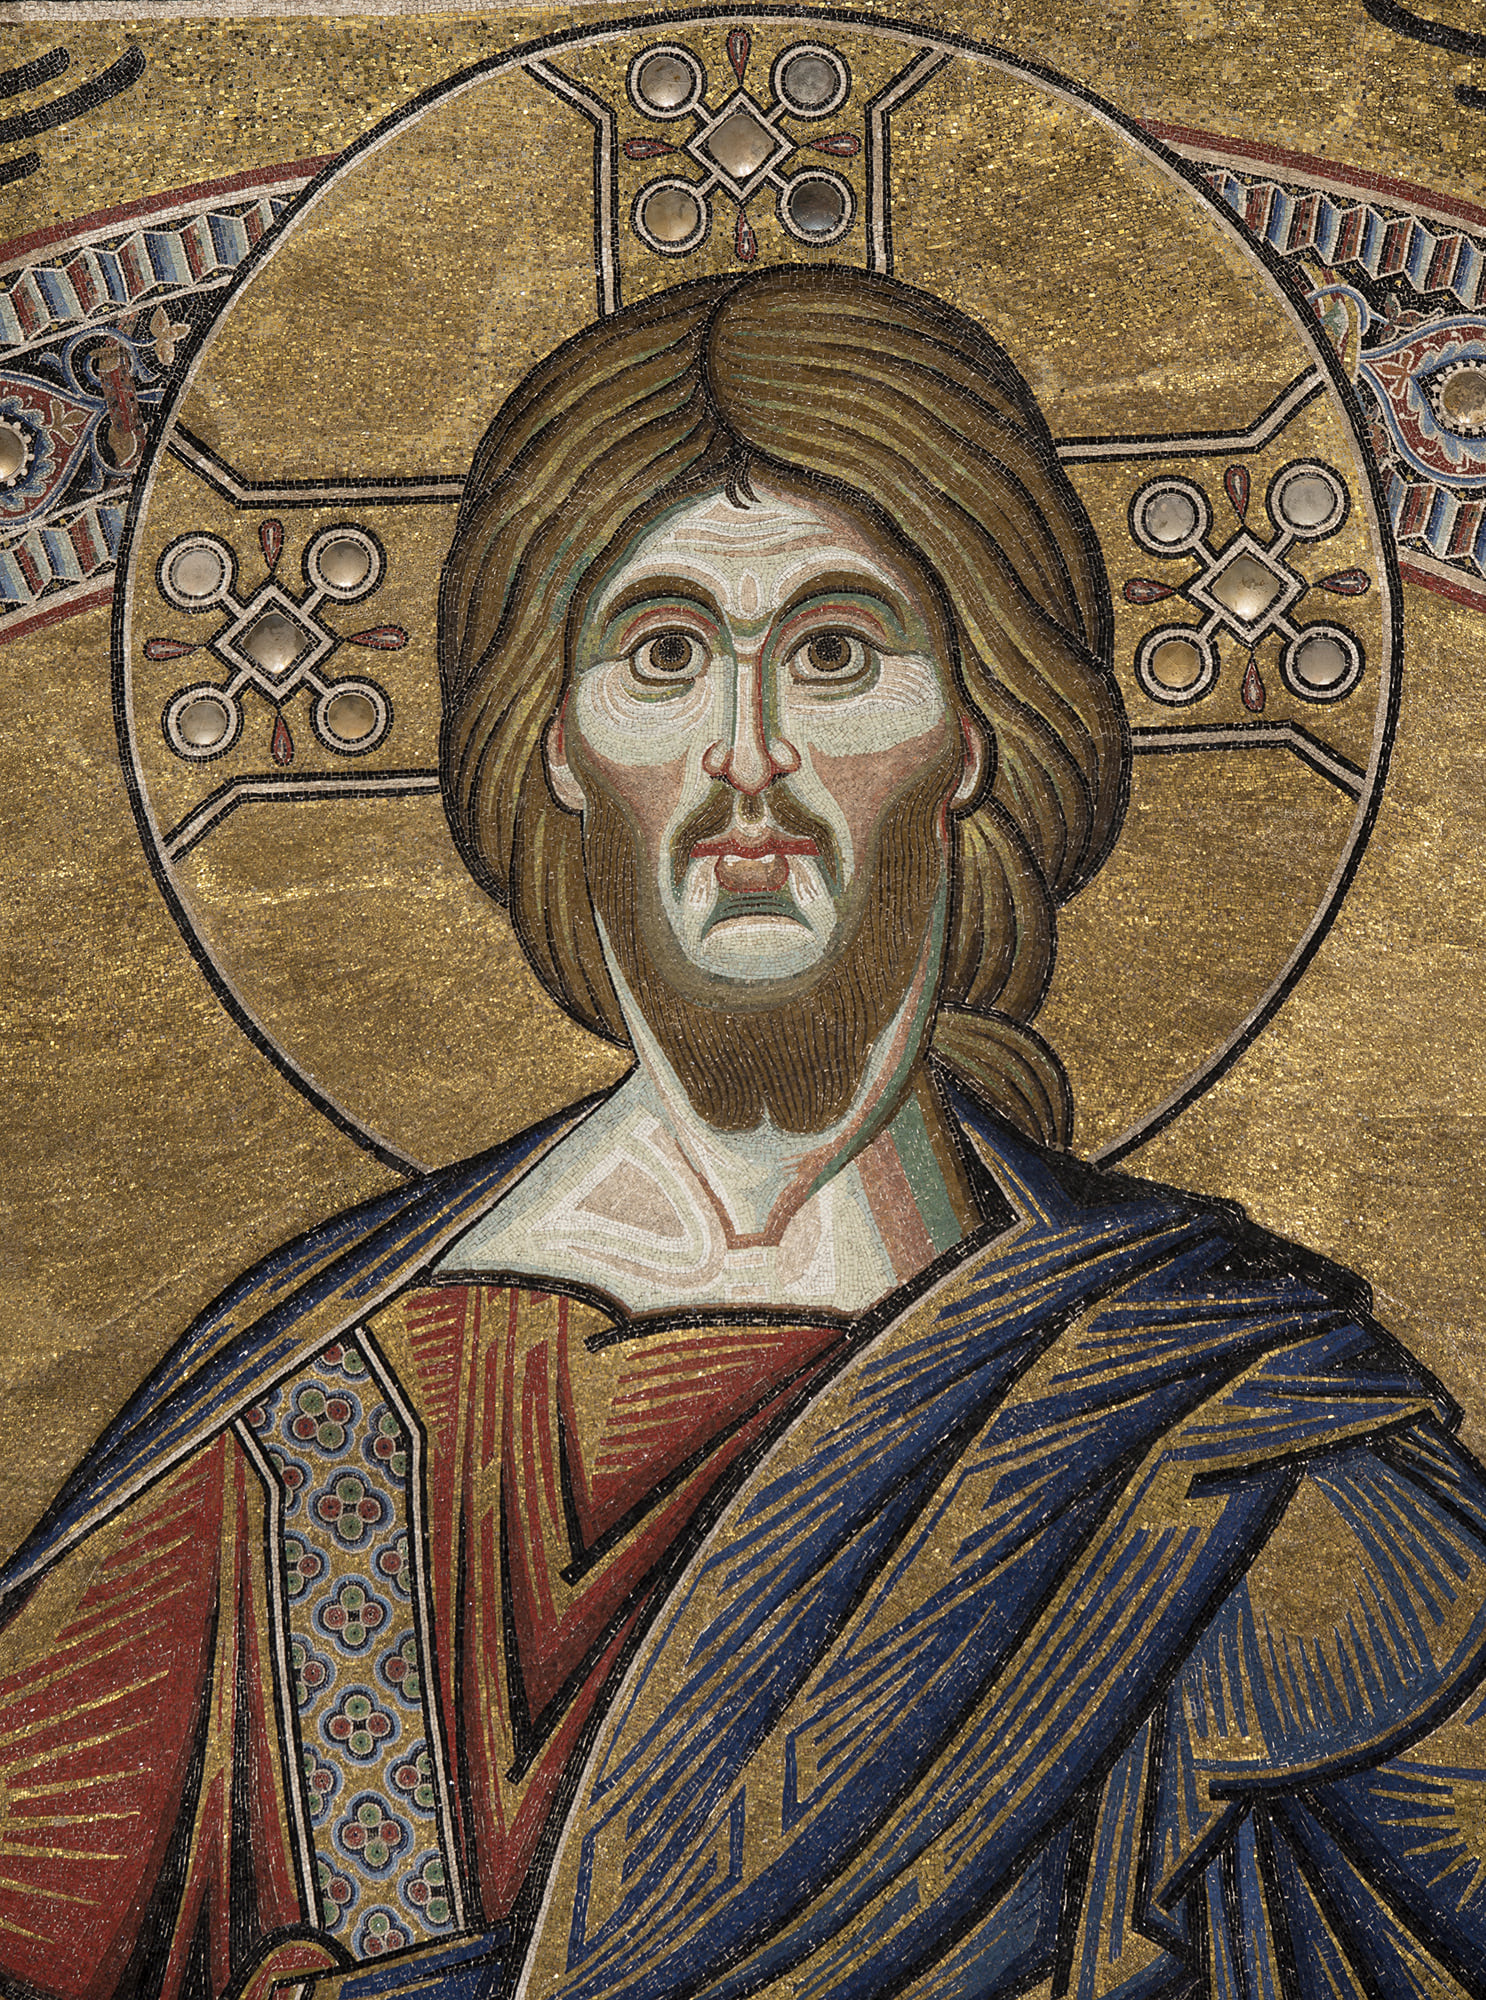 Baptistery mosaics, detail of the Christ the Judge